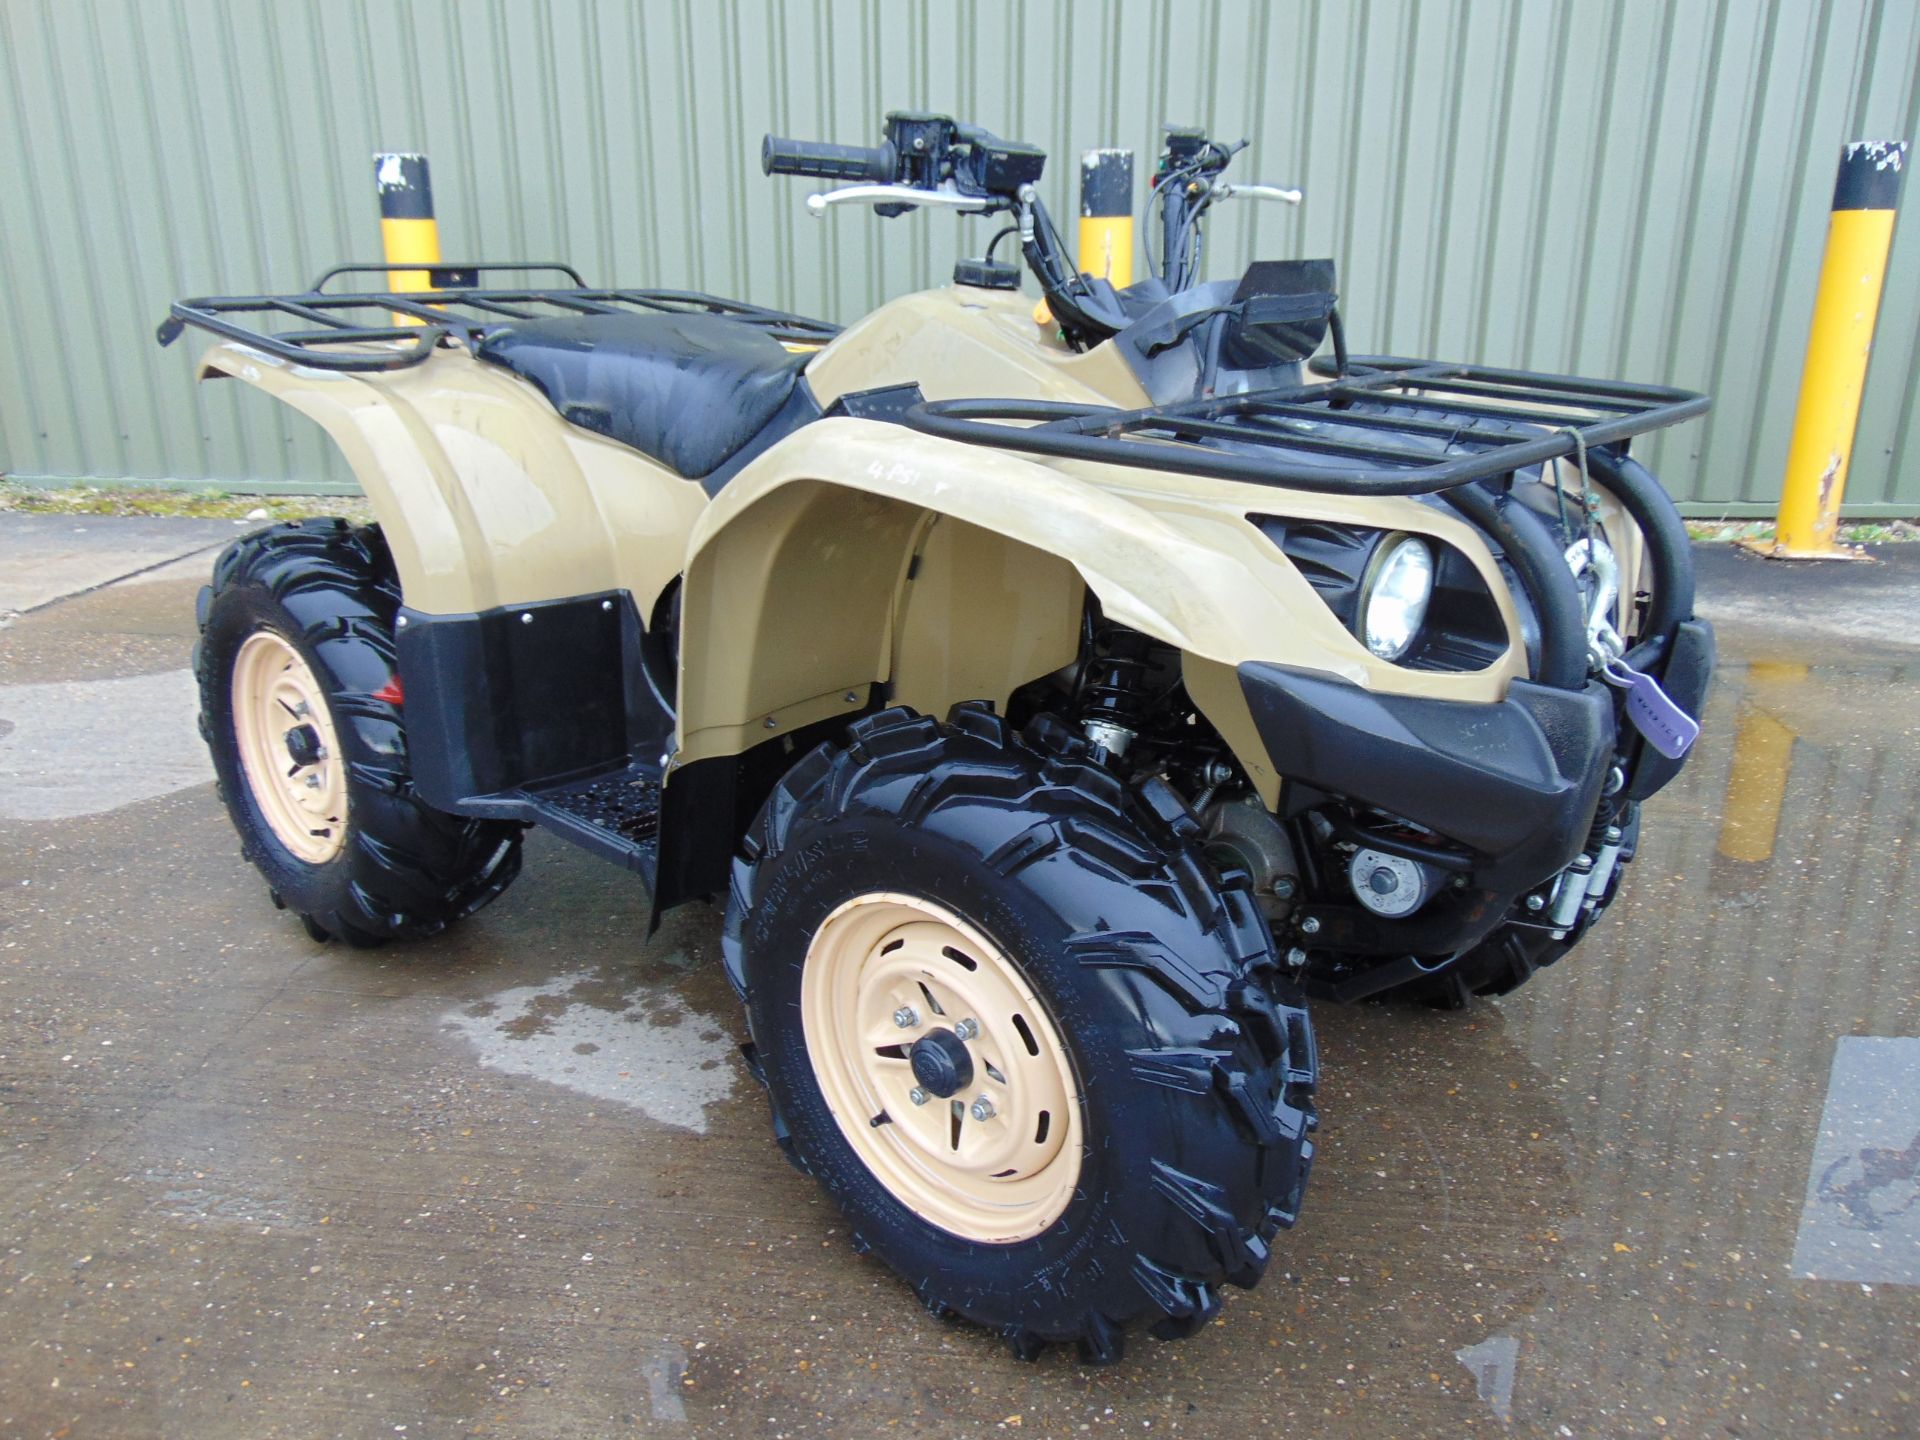 Military Specification Yamaha Grizzly 450 4 x 4 ATV Quad Bike - Image 2 of 23